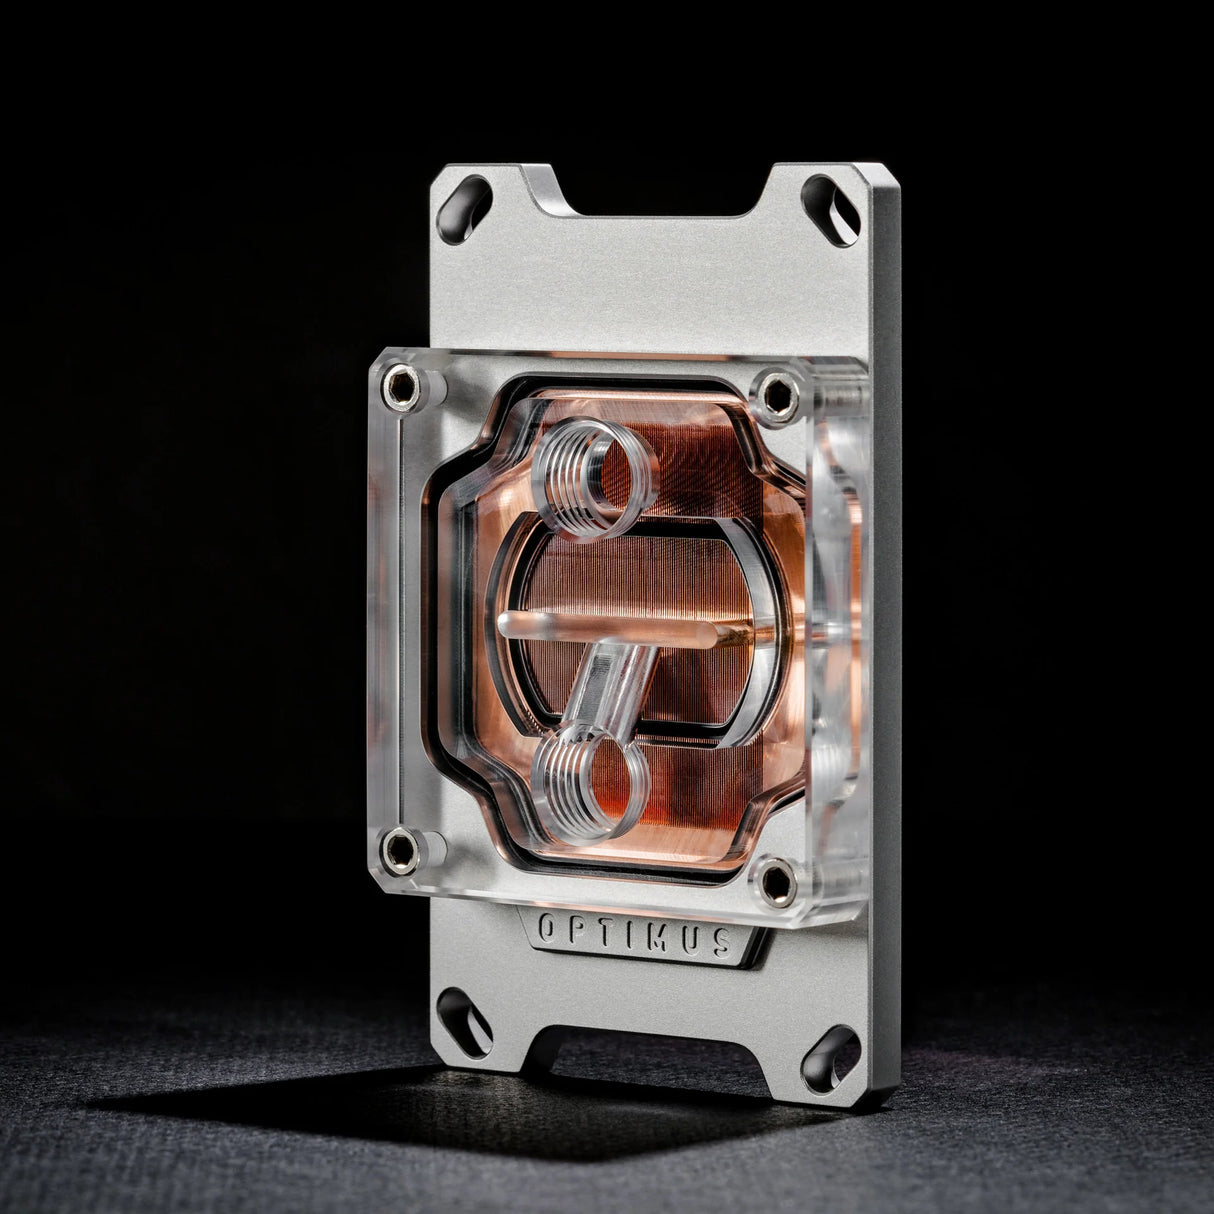 Optimus Foundation CPU BLOCK - AMD (AM5, AM4) Acrylic Top with Satin Silver Bracket Copper Cold Plate